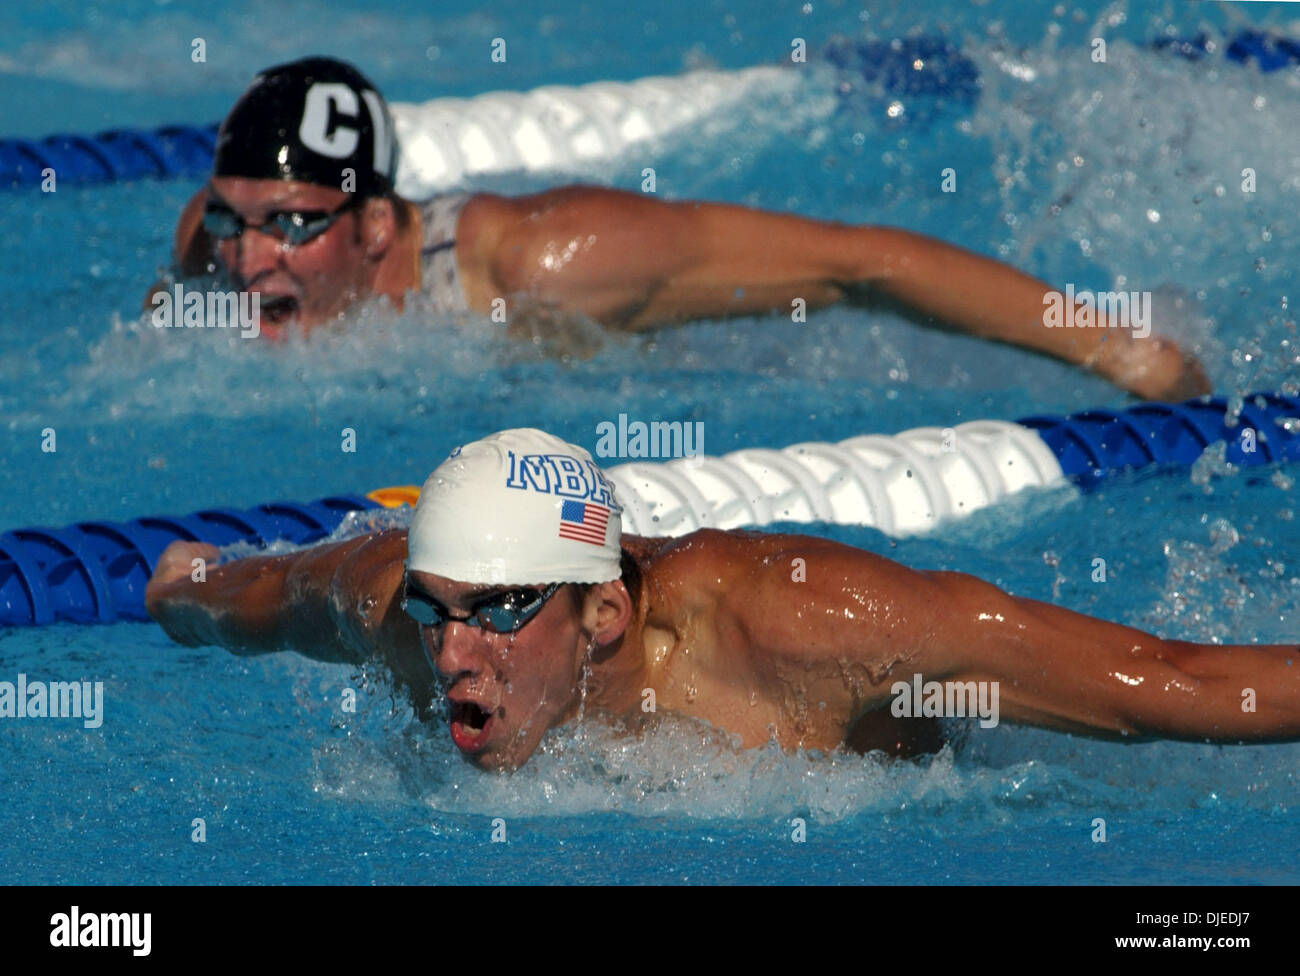 Michael Phelps continued his domination at the U.S. Olympic Team Swim Trials in Long Beach, Calif.  winning the 200m Butterfly Saturday July 10, 2004 and claiming another berth to the Greek Games in August. Tom Malchow placed 2nd, three seconds behind Phelps. (Contra Costa Times/Karl Mondon )/ZUMA Press Stock Photo